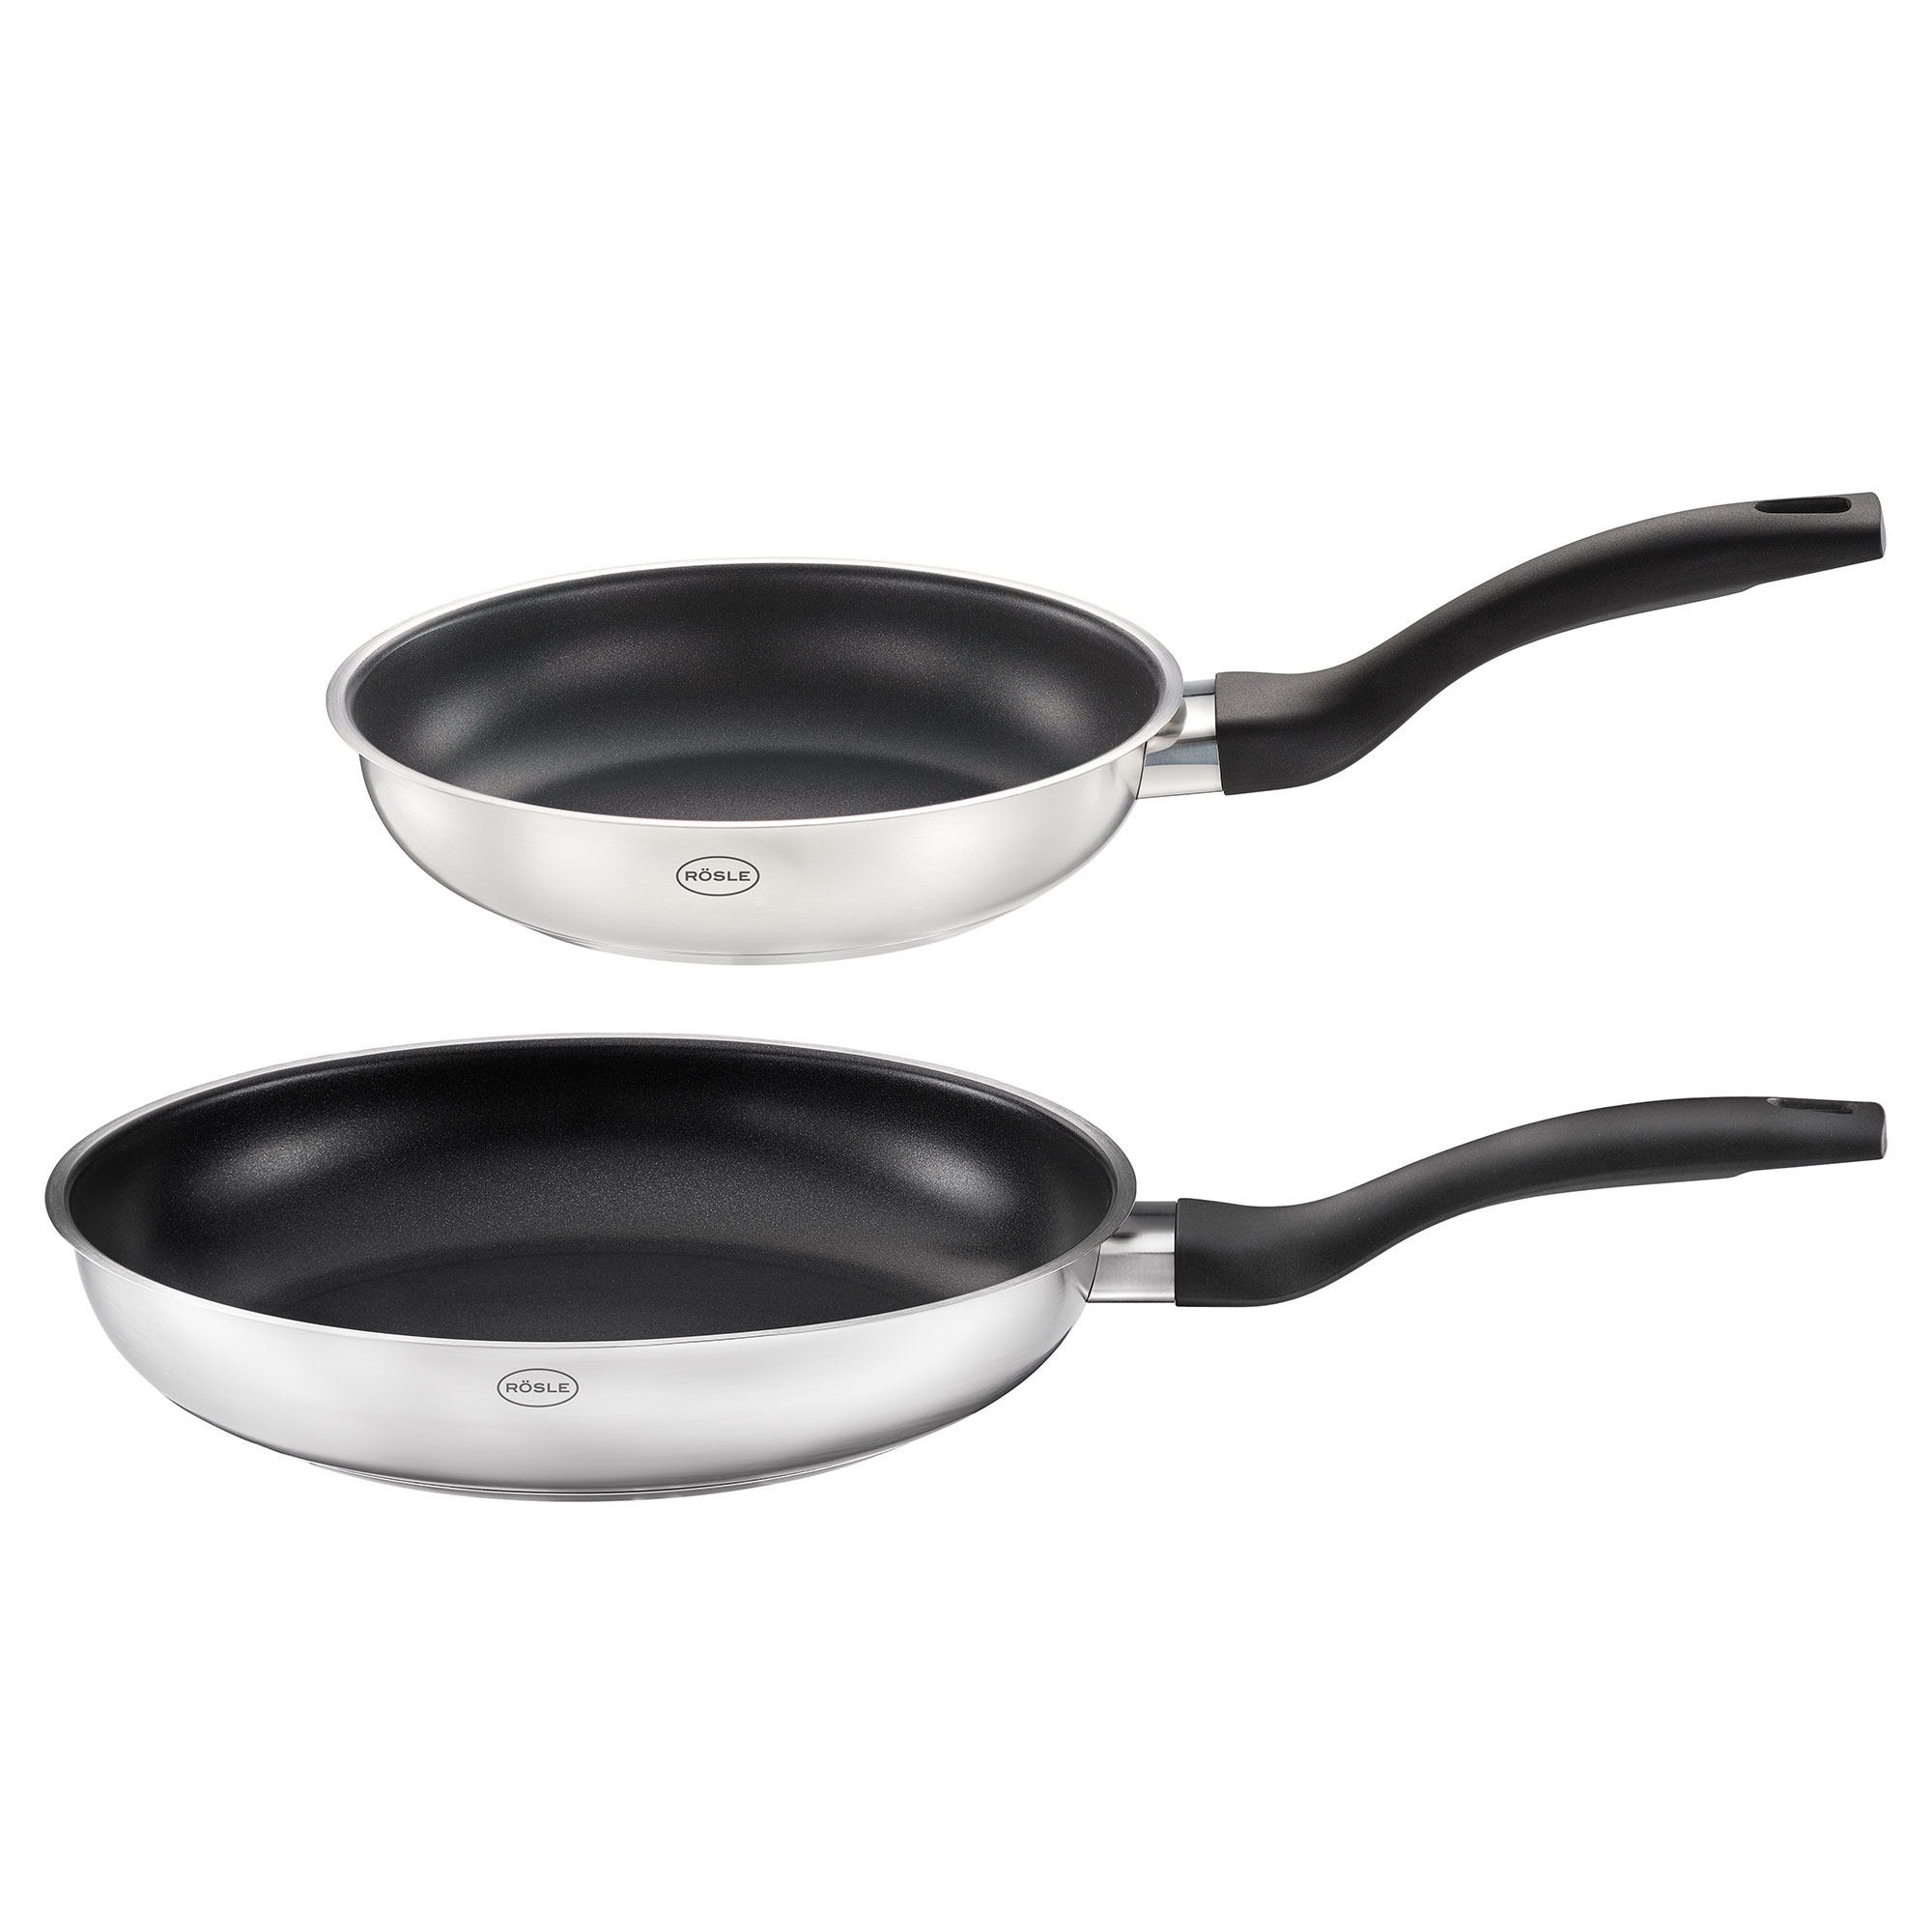 Frying Pan Set "Basic Line" Ø 20 cm, 24 cm | 8.0 in., 9.5 in. with non-stick coating ProPlex